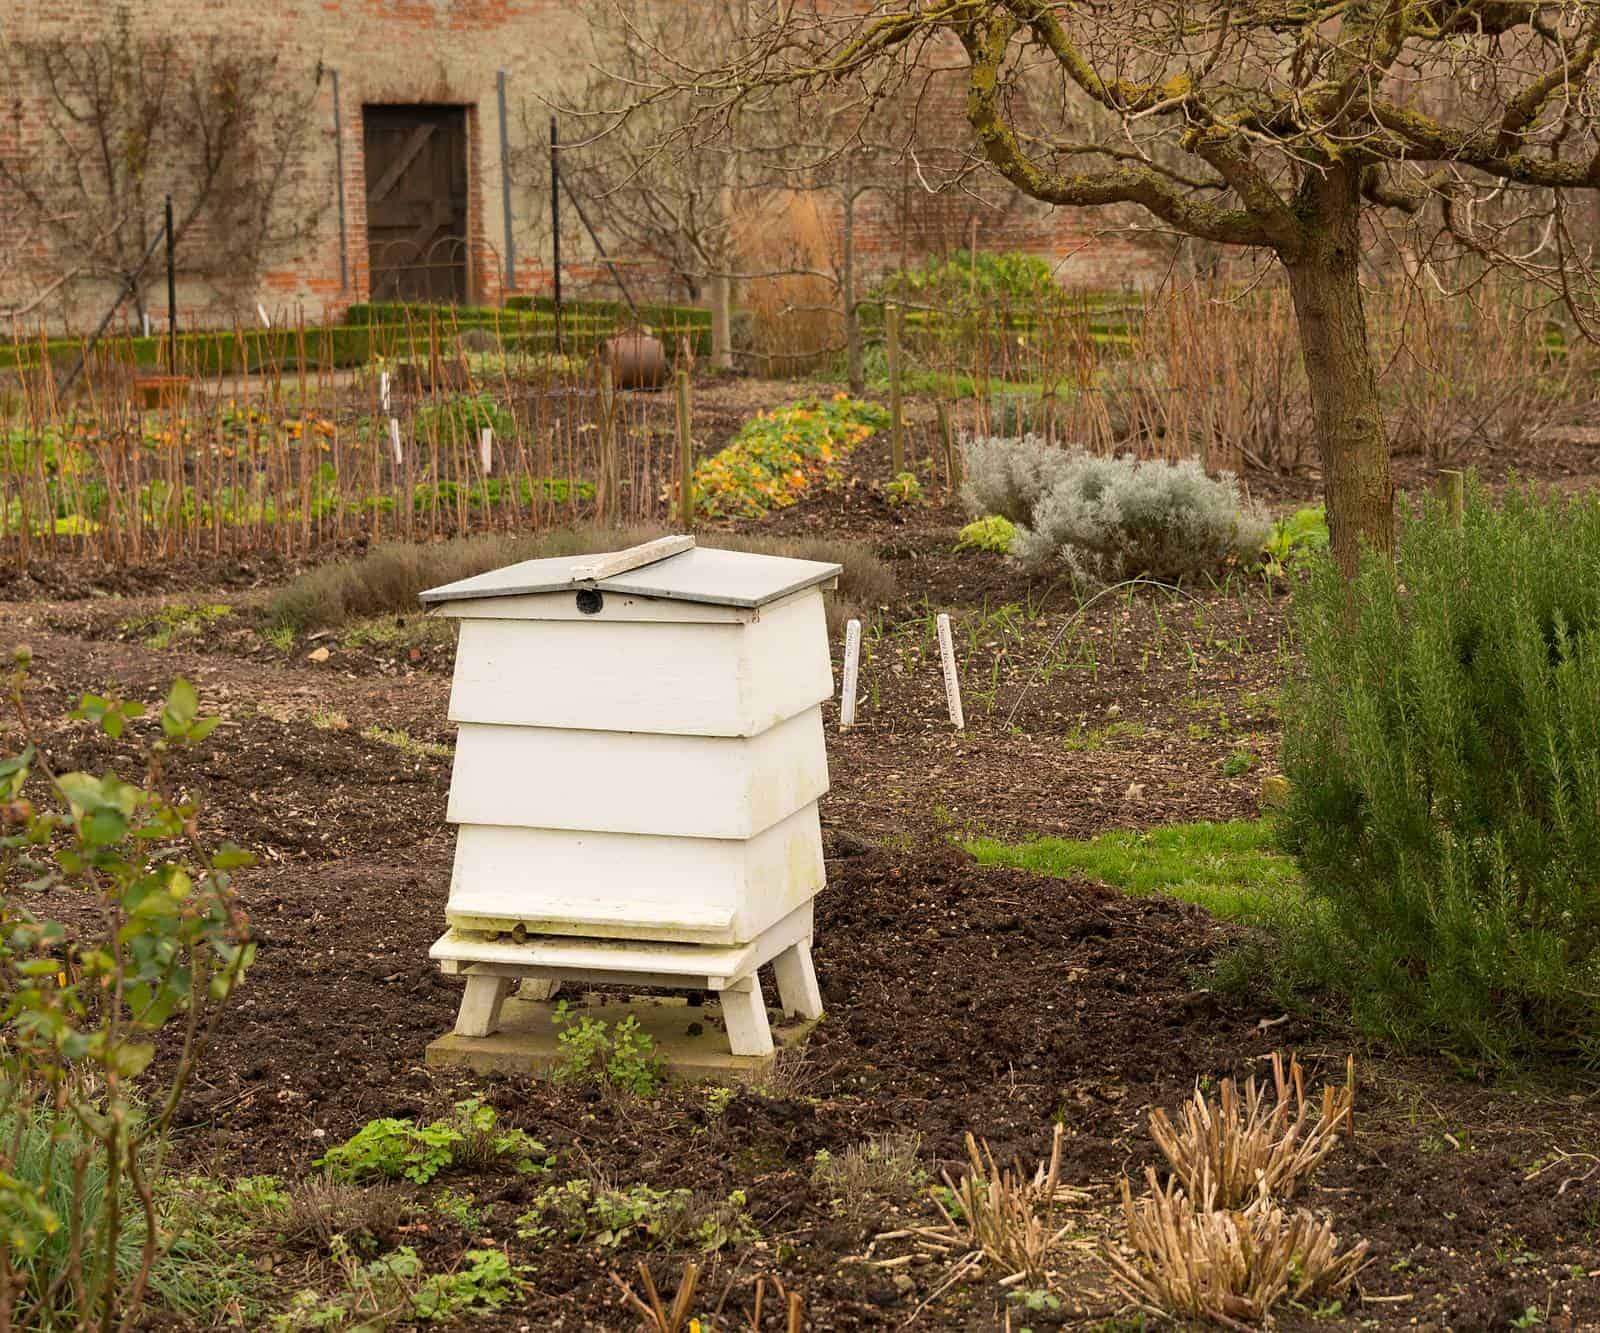 How far should I keep beehives from my house?